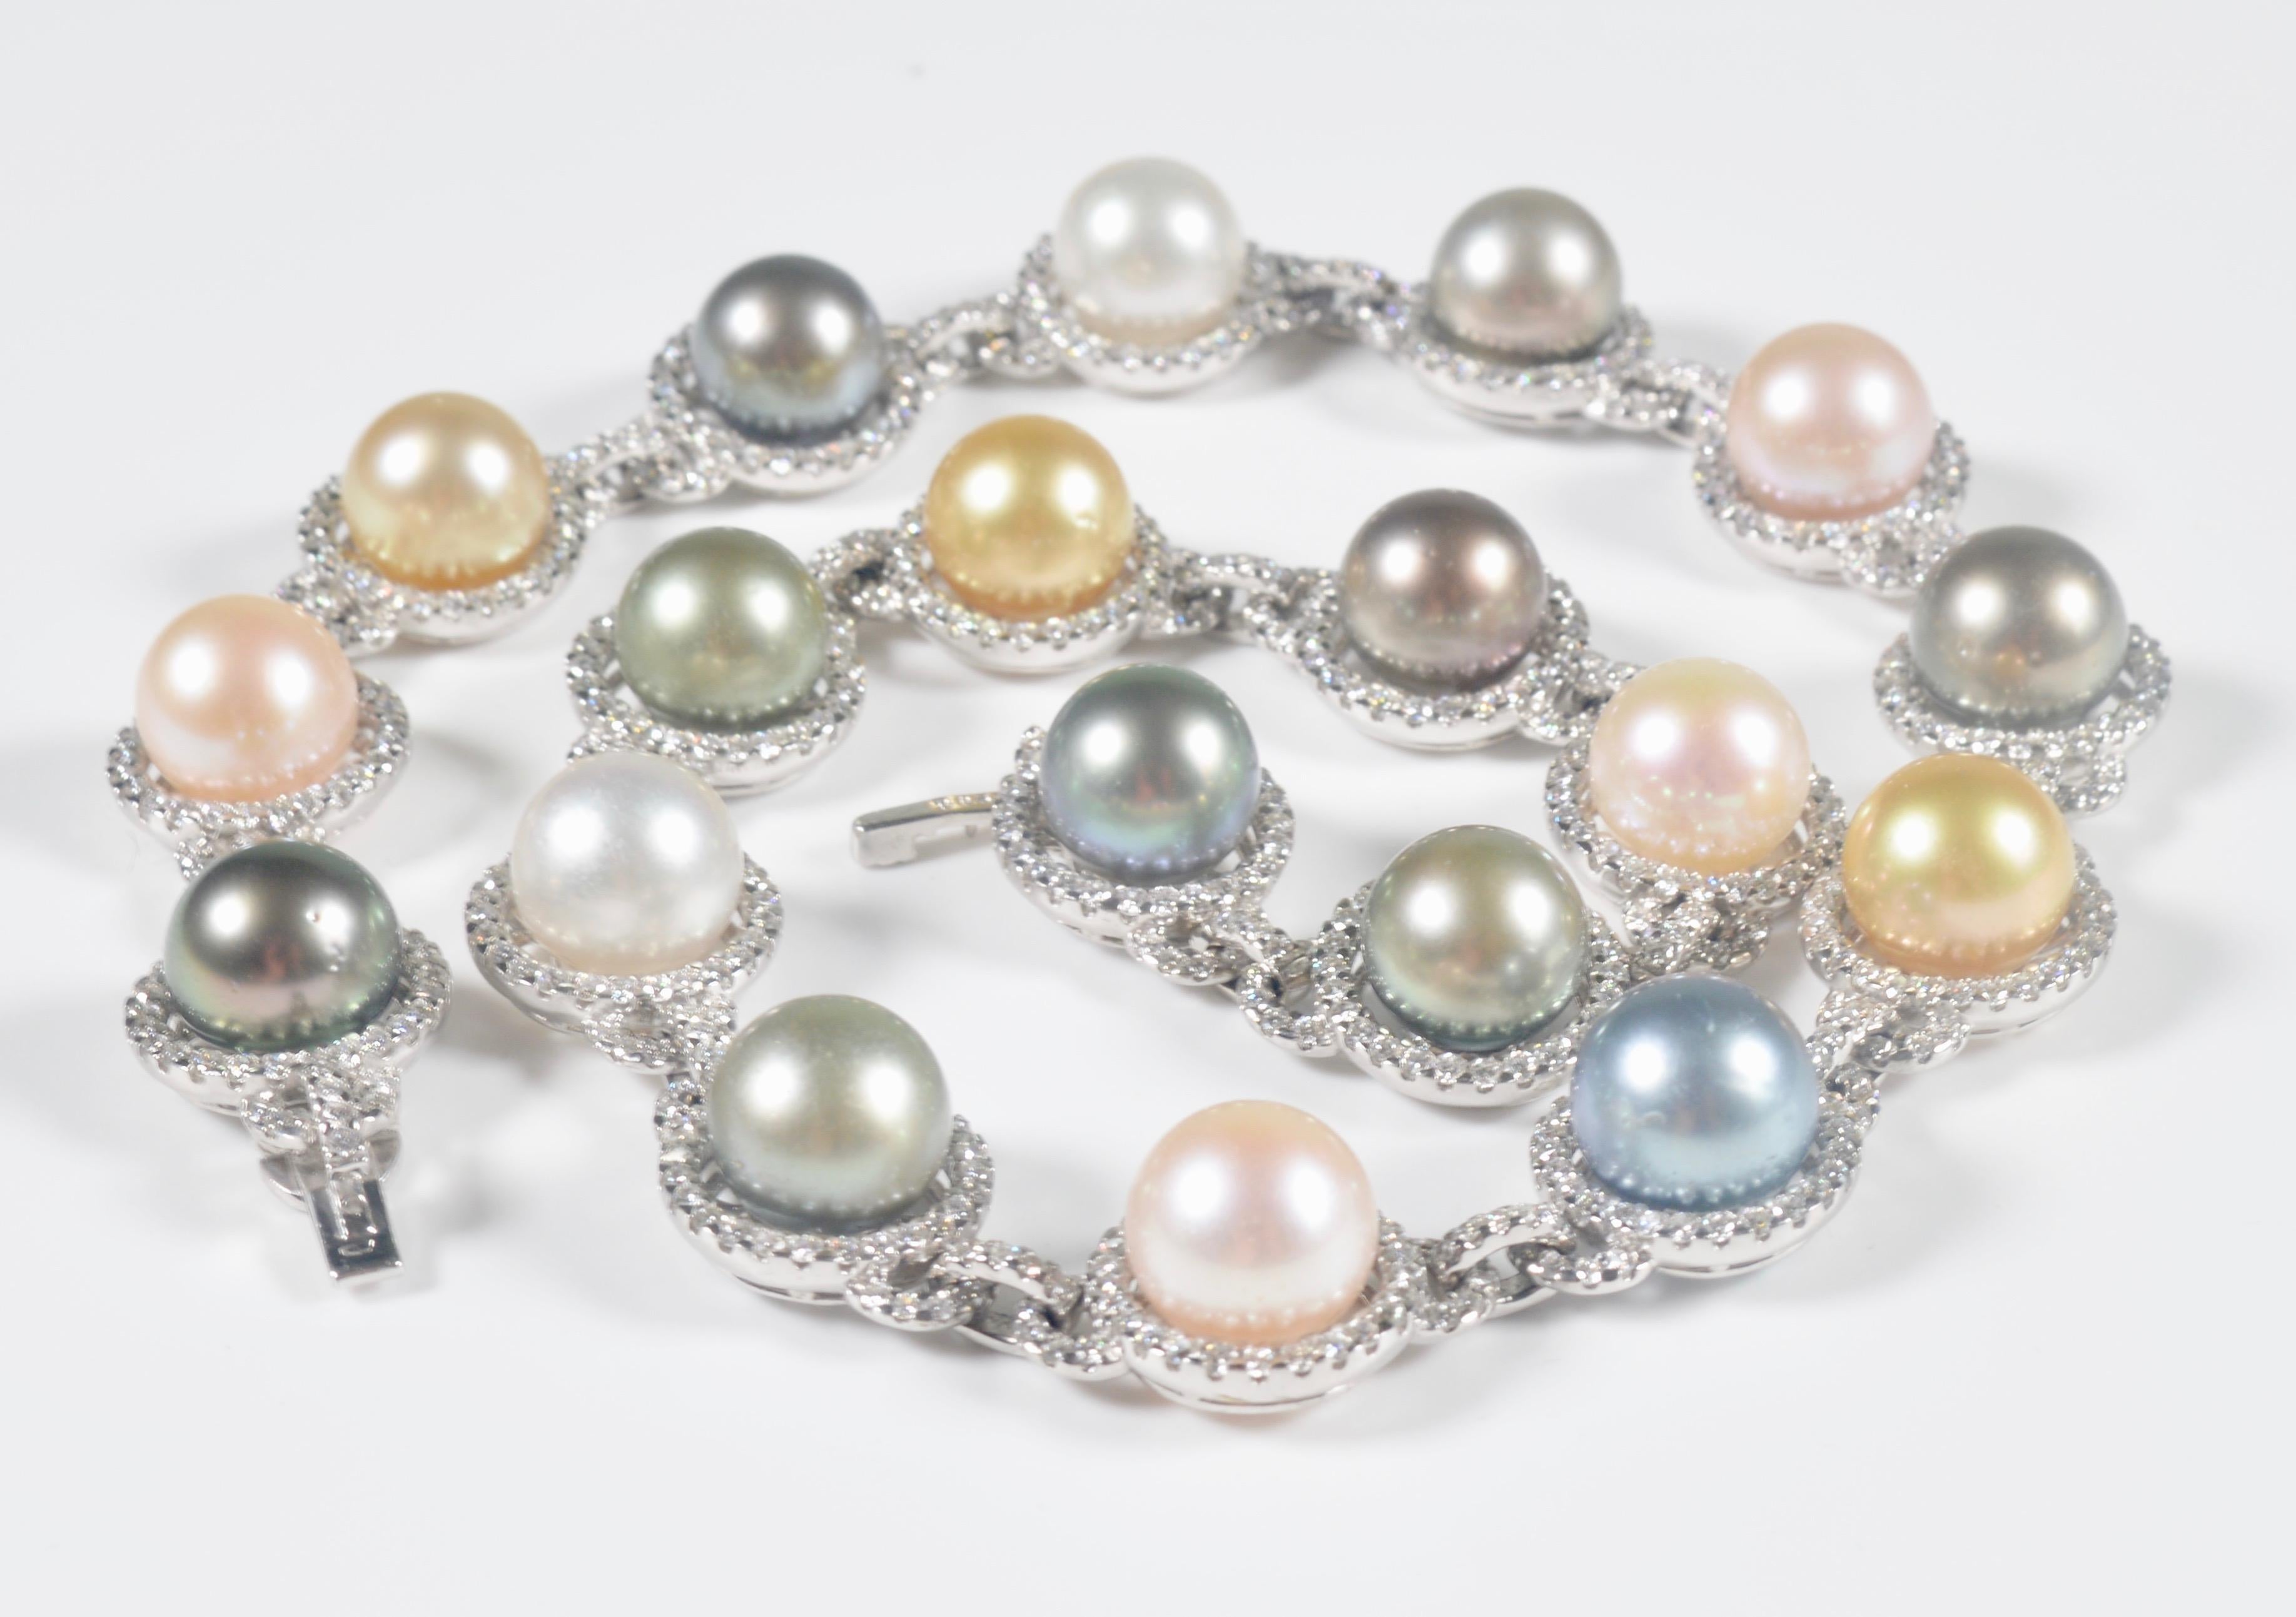 Brilliant Cut White Gold, South Sea Pearl, Tahitian Pearl and Diamond Necklace 9.53 Carat